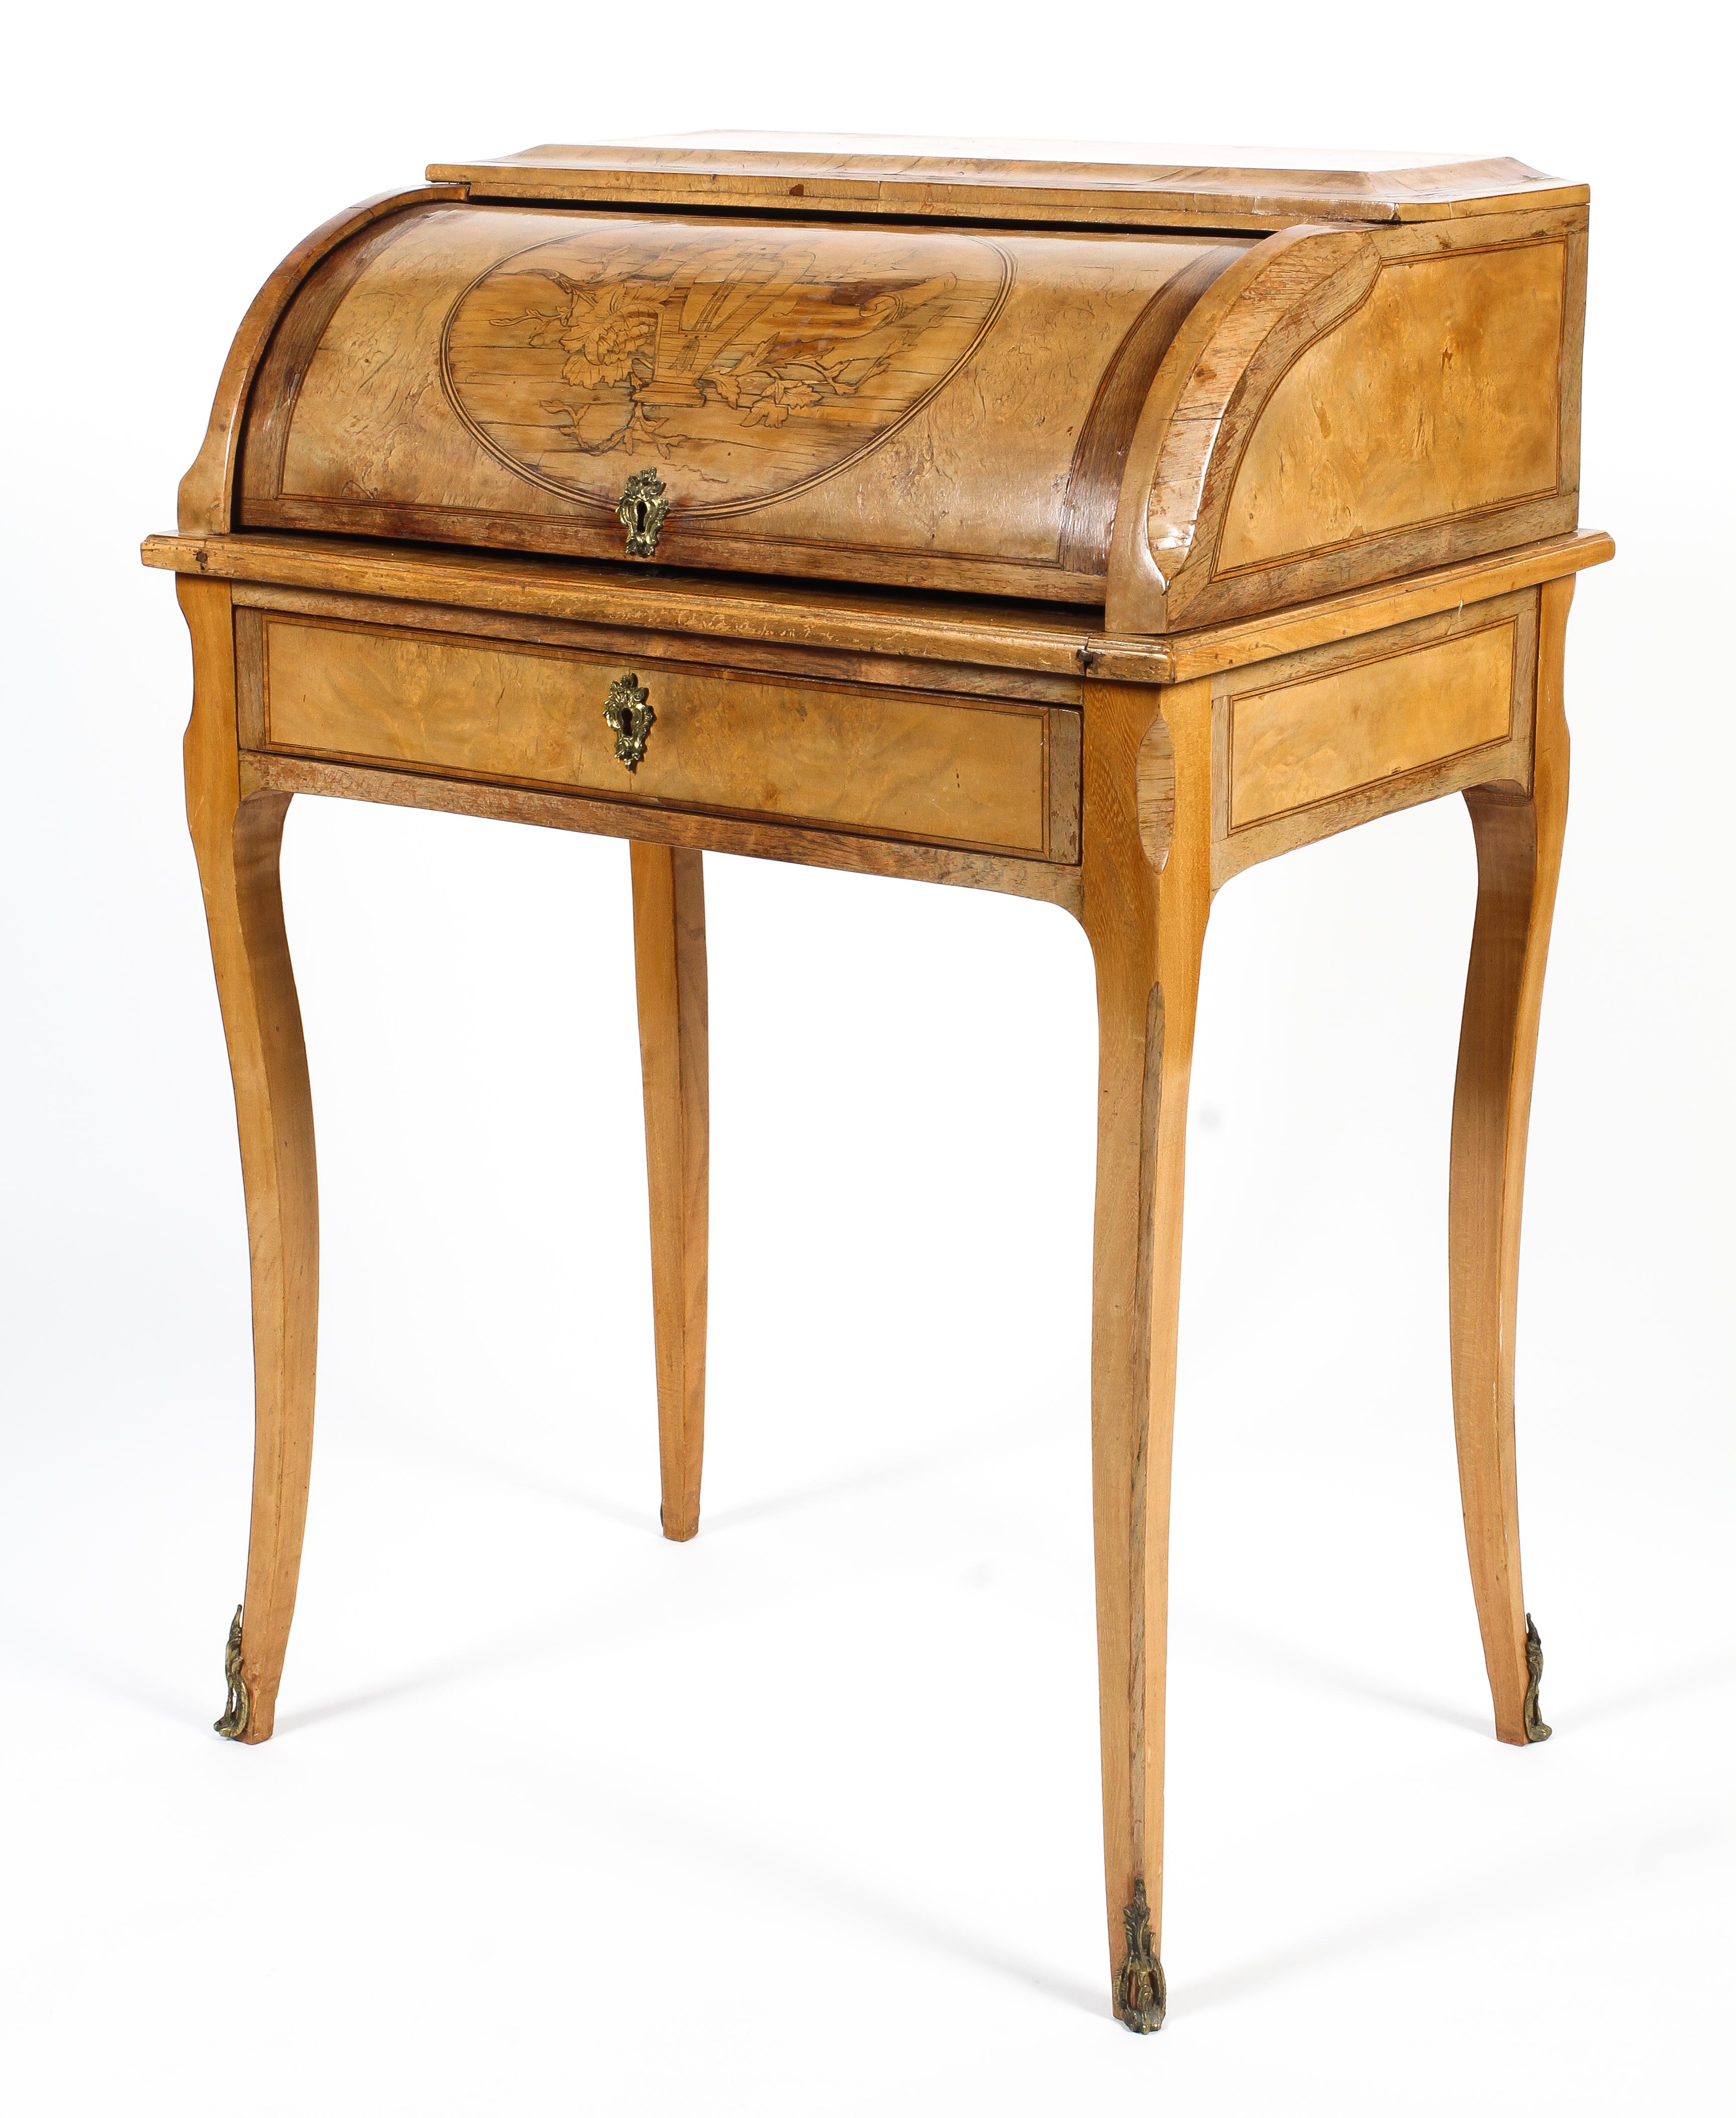 A late 19th century French style walnut and gilt-metal mounted marquetry ladies writing bureau.